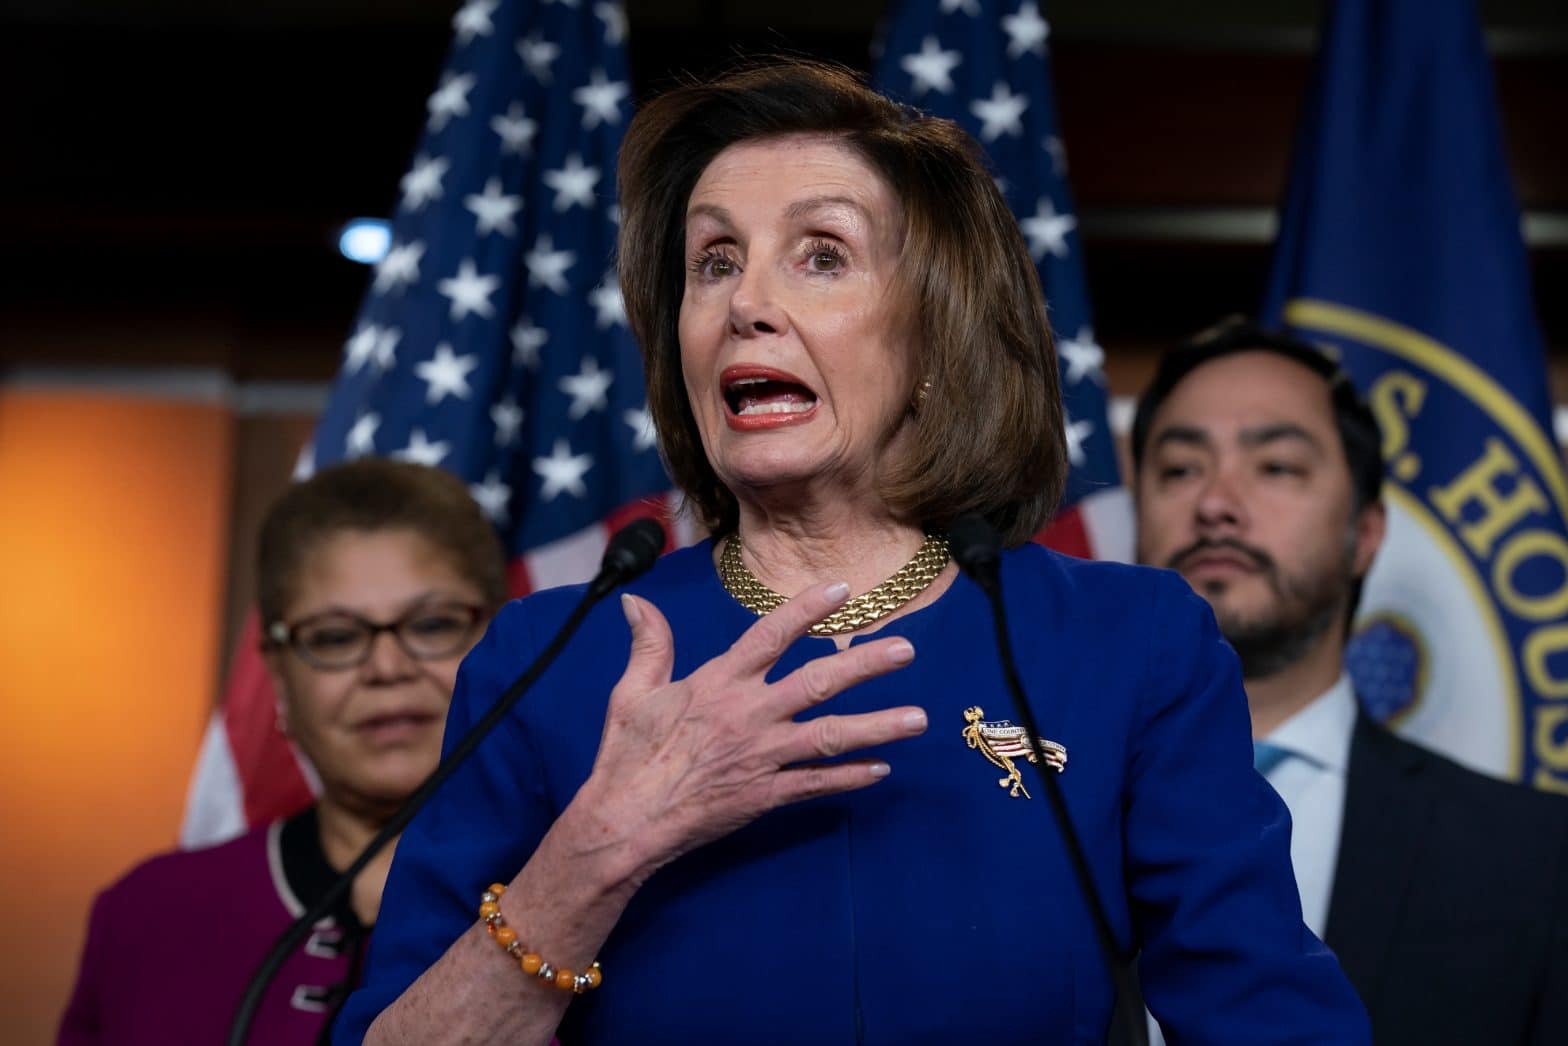 Pelosi Slams Facebook Over Trump Ad That Could Be Confused for Census